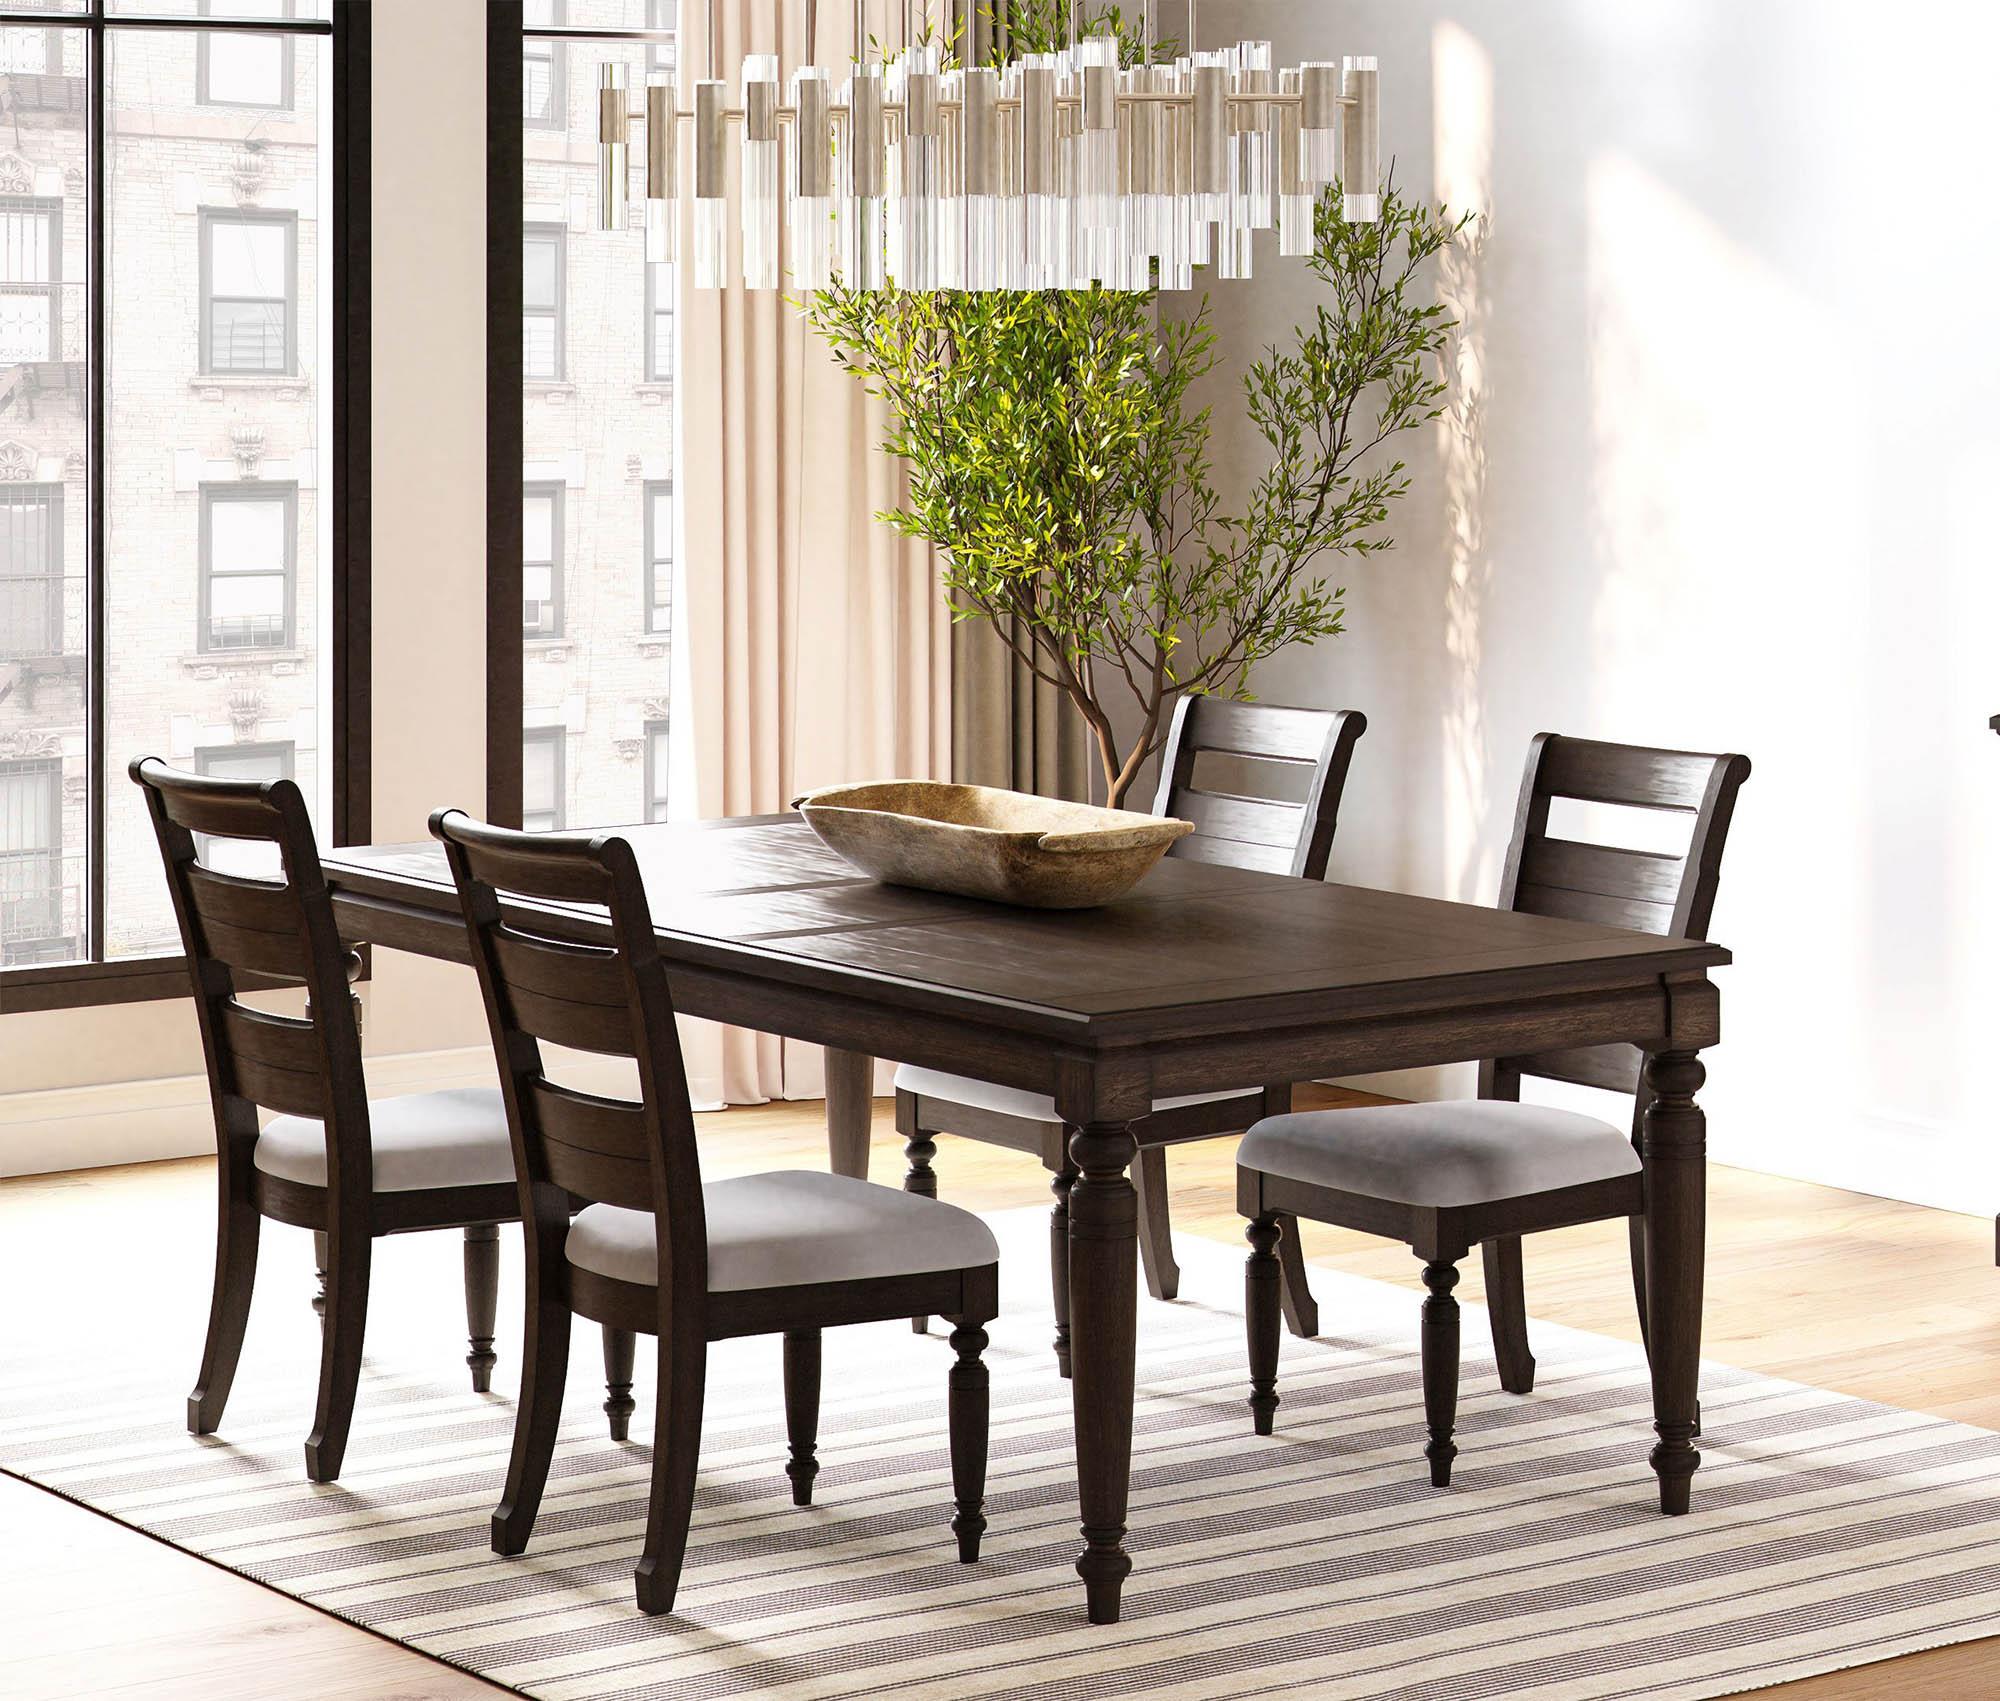 Traditional, Transitional Dining Table Set BELLAMY 5910-500 5PC 5910-500 5PC in Brown Fabric